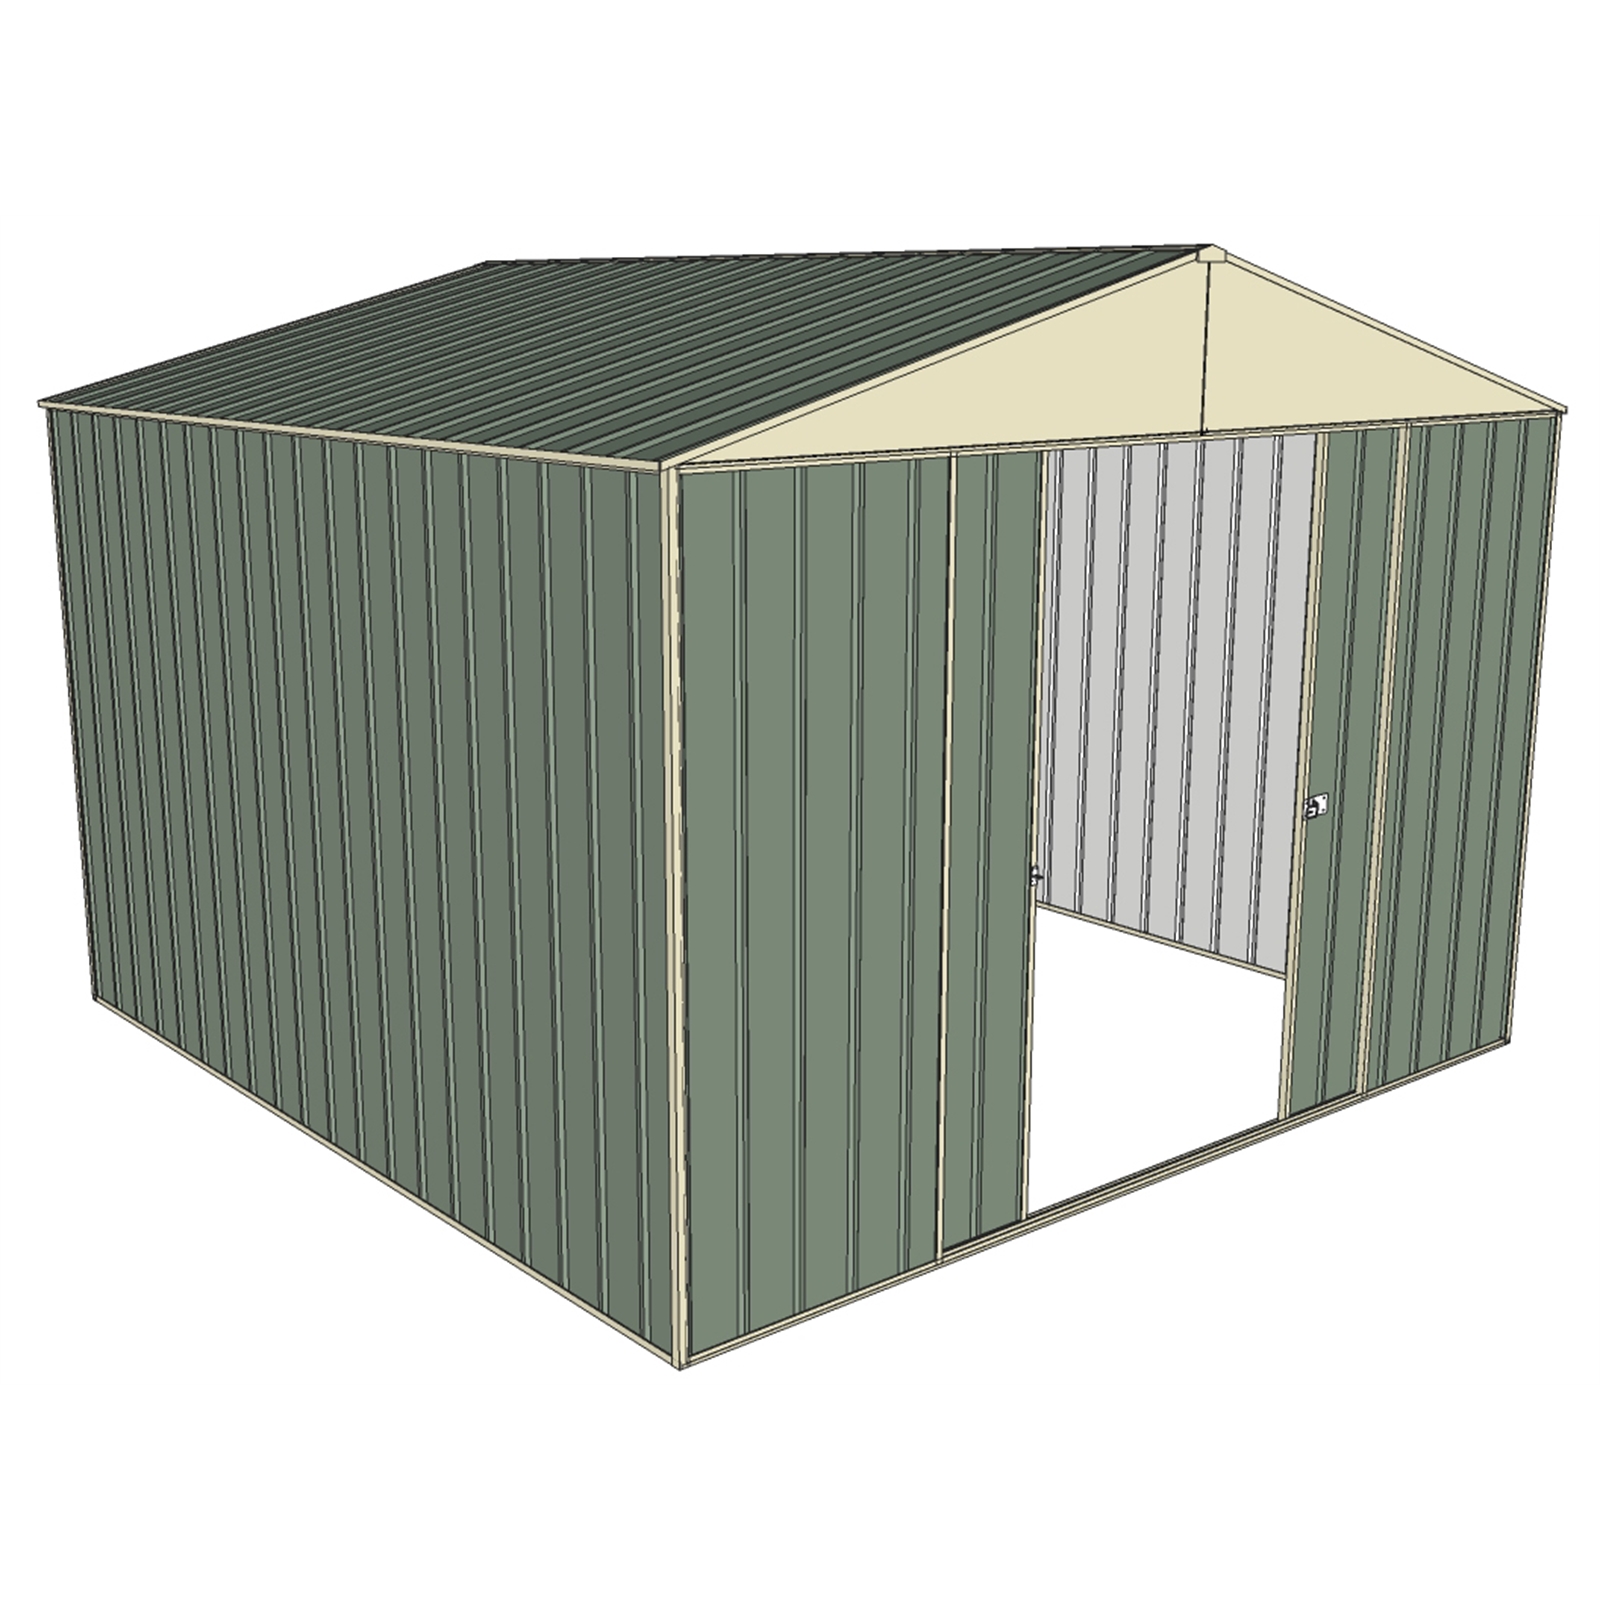 Build-a-Shed 3.0 x 3.0m Green Double Sliding Door Shed